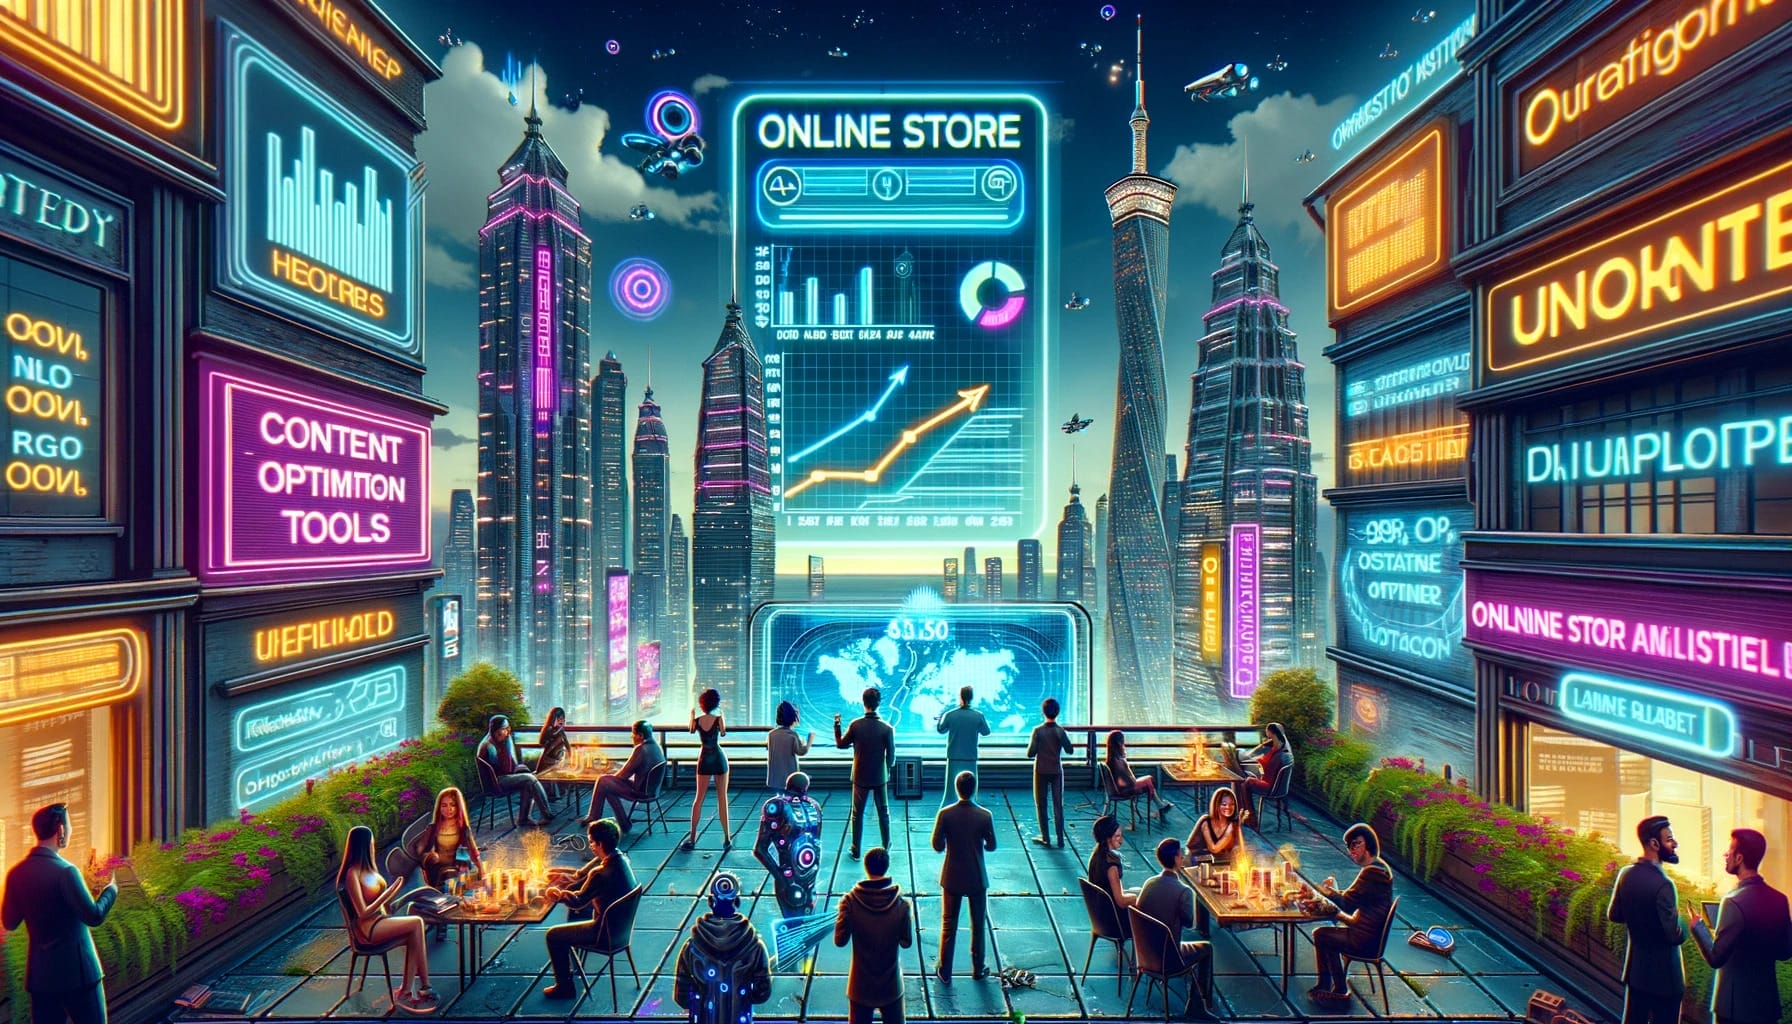 Cyberpunk-style illustration of a rooftop gathering in a mega-city. Entrepreneurs and tech enthusiasts congregate around a holographic projector displ